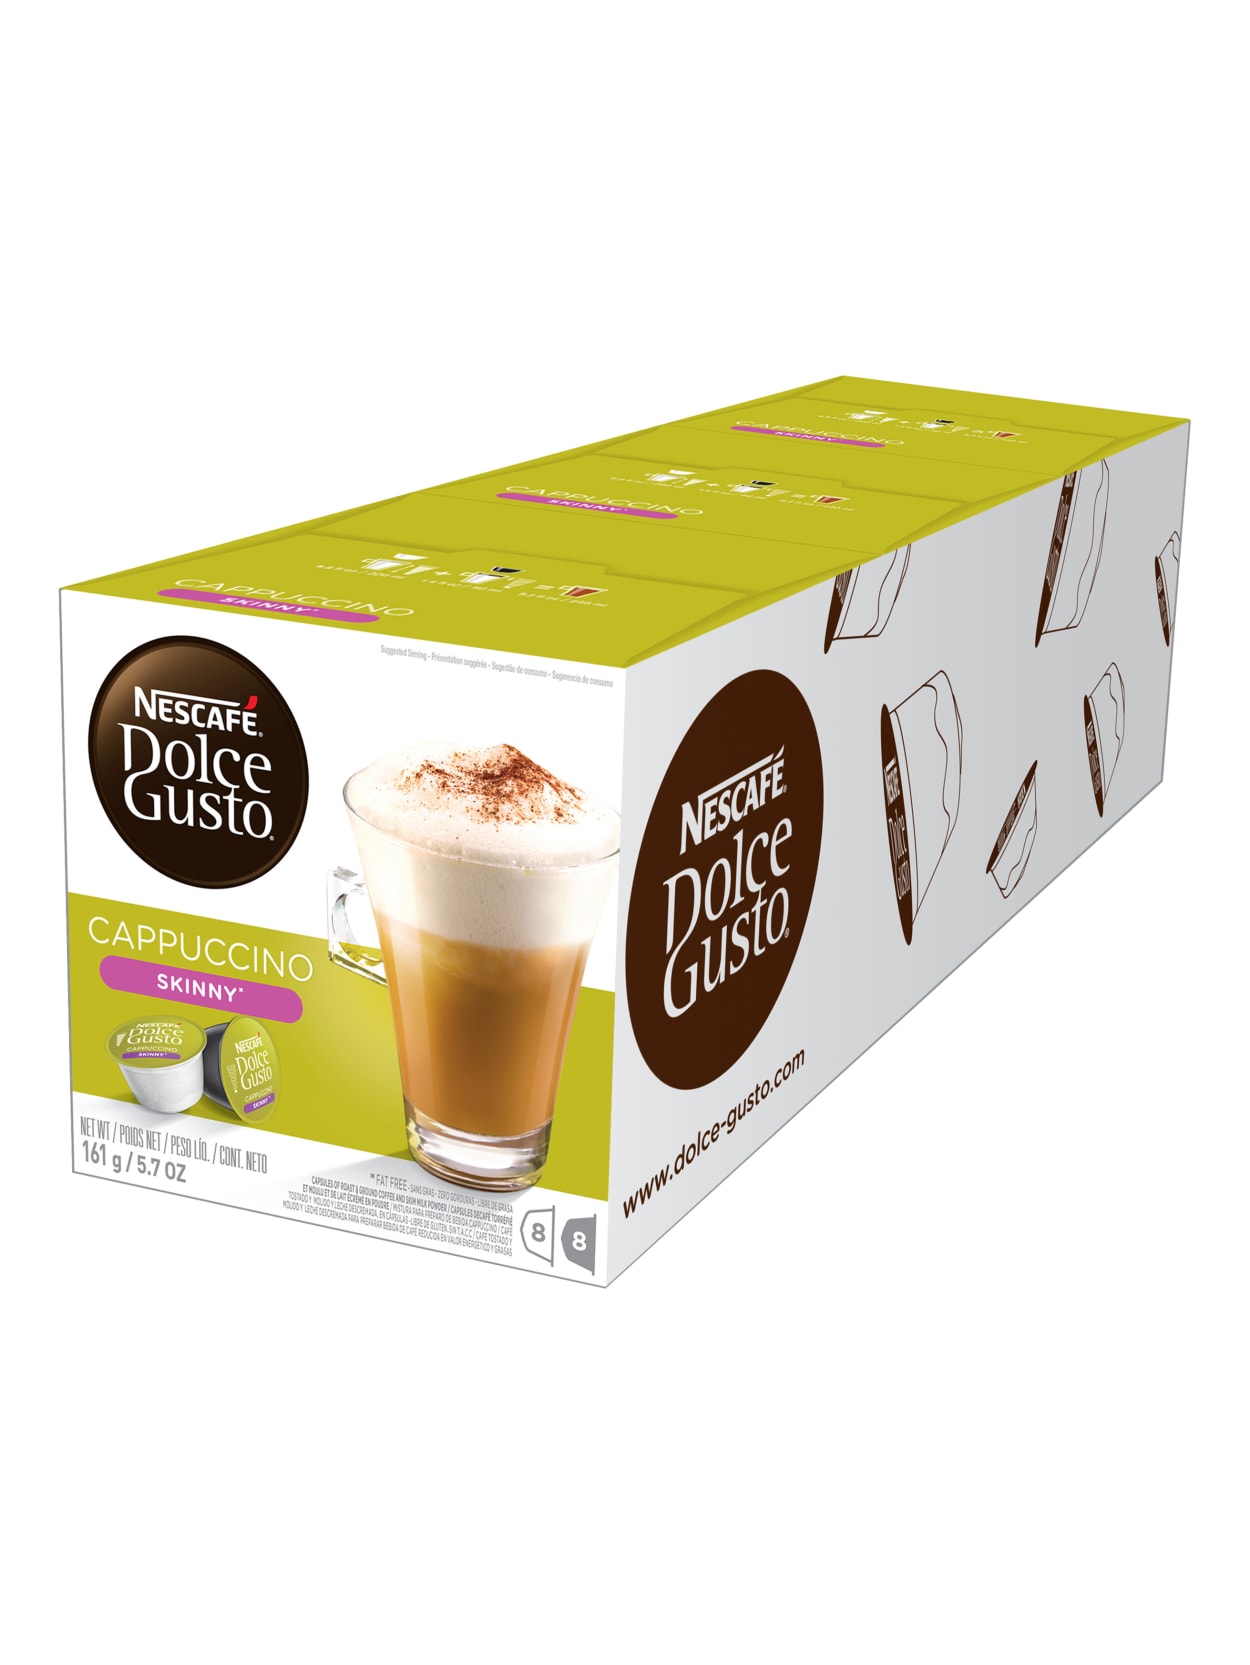 Капсулы Dolce gusto Cappuccino skinny Light. Dolce gusto Cappuccino skinny. Nescafe Dolce gusto Cappuccino. Кофе в капсулах Nescafe Dolce gusto Cappuccino 8 порций. Dolce gusto cappuccino